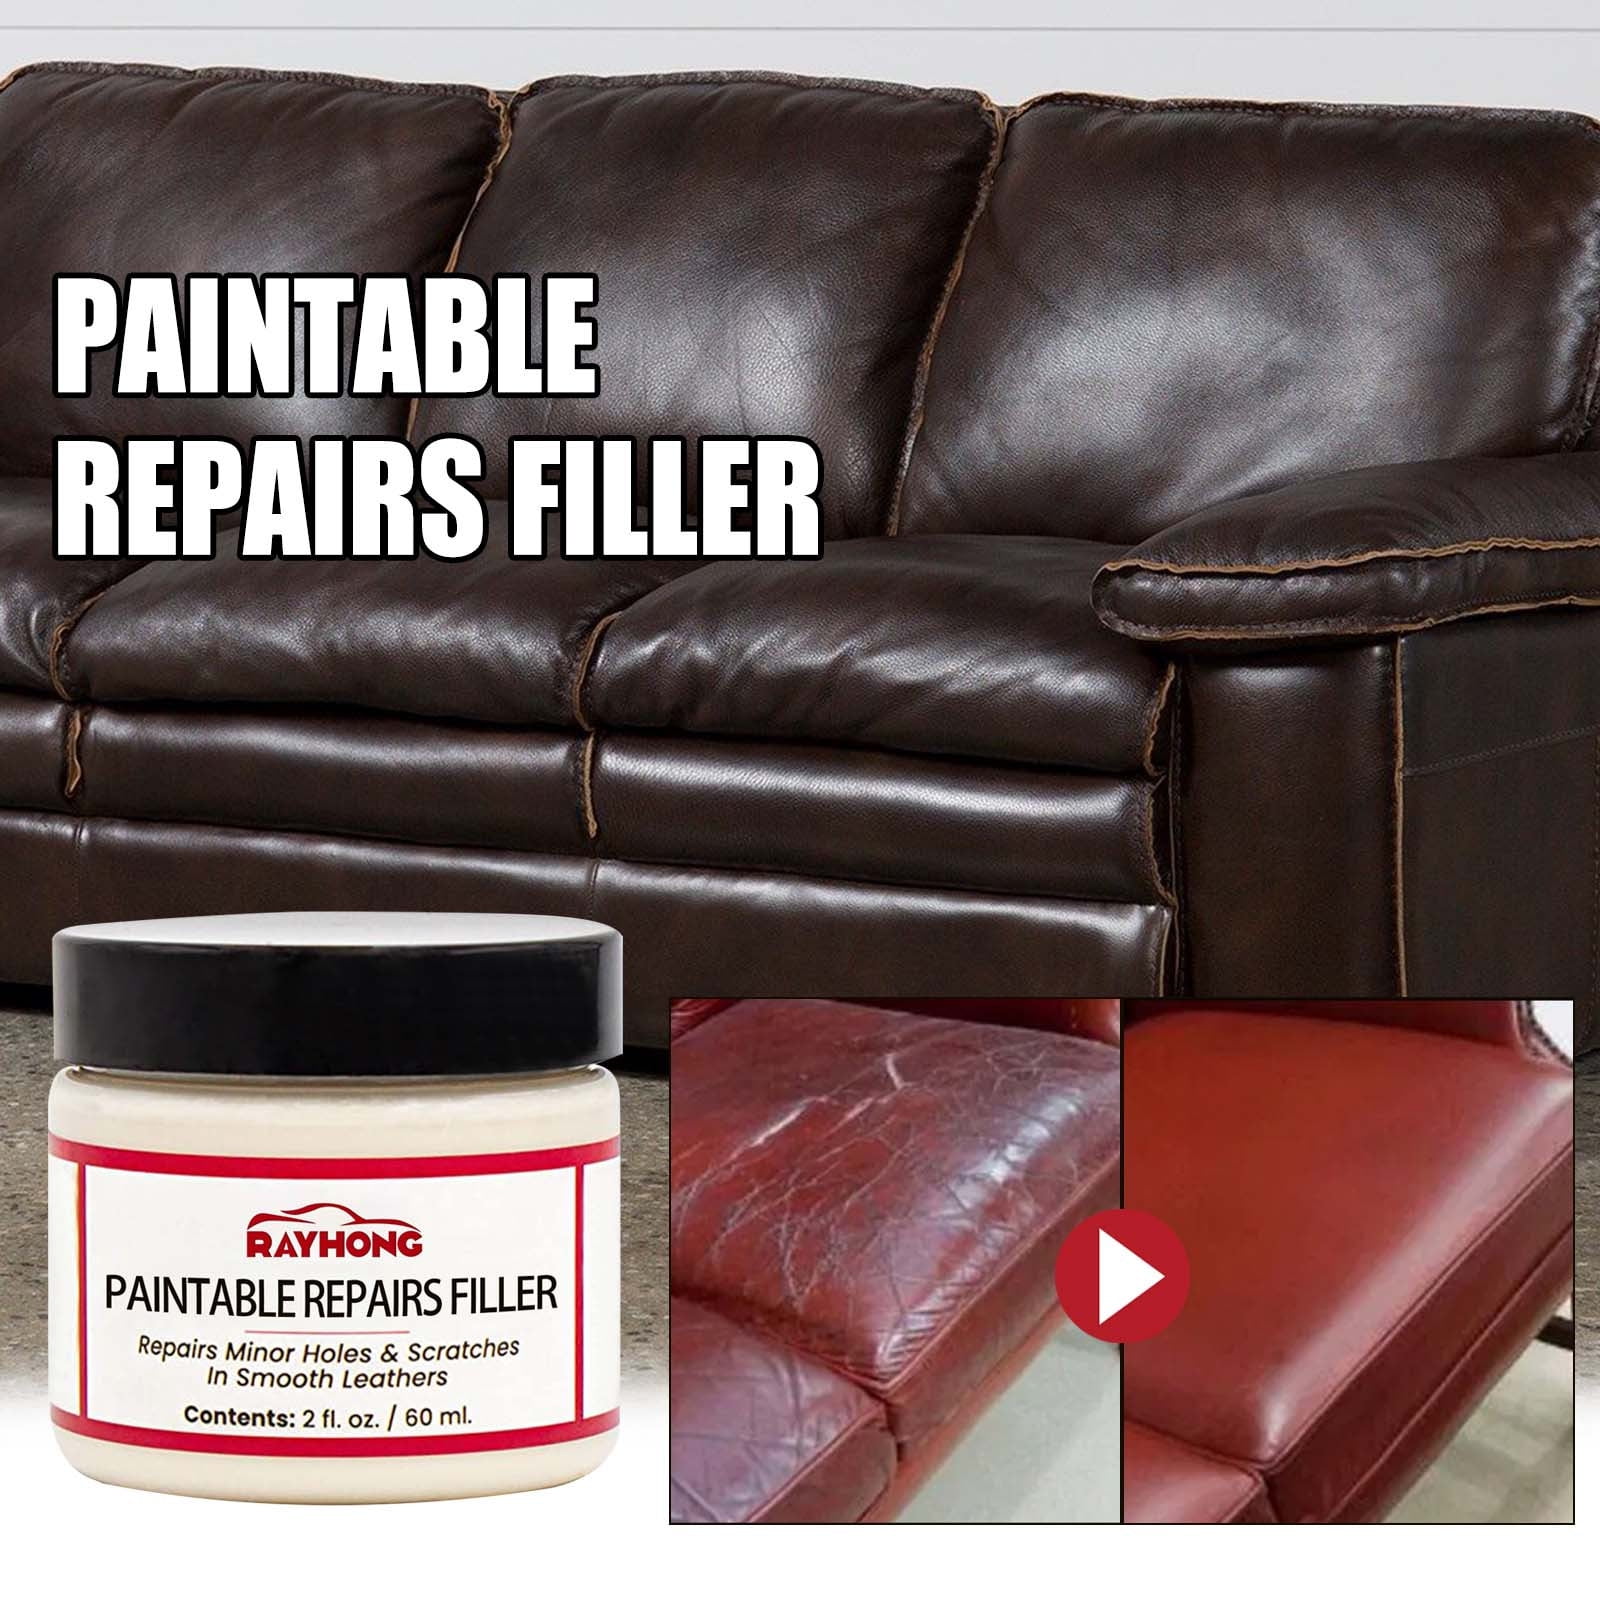 Furniture Leather Max Complete Leather Refinish and Repair Kit/Now with 3  Color Shades to Blend with/Leather & Vinyl Restorer (Deep Browns)